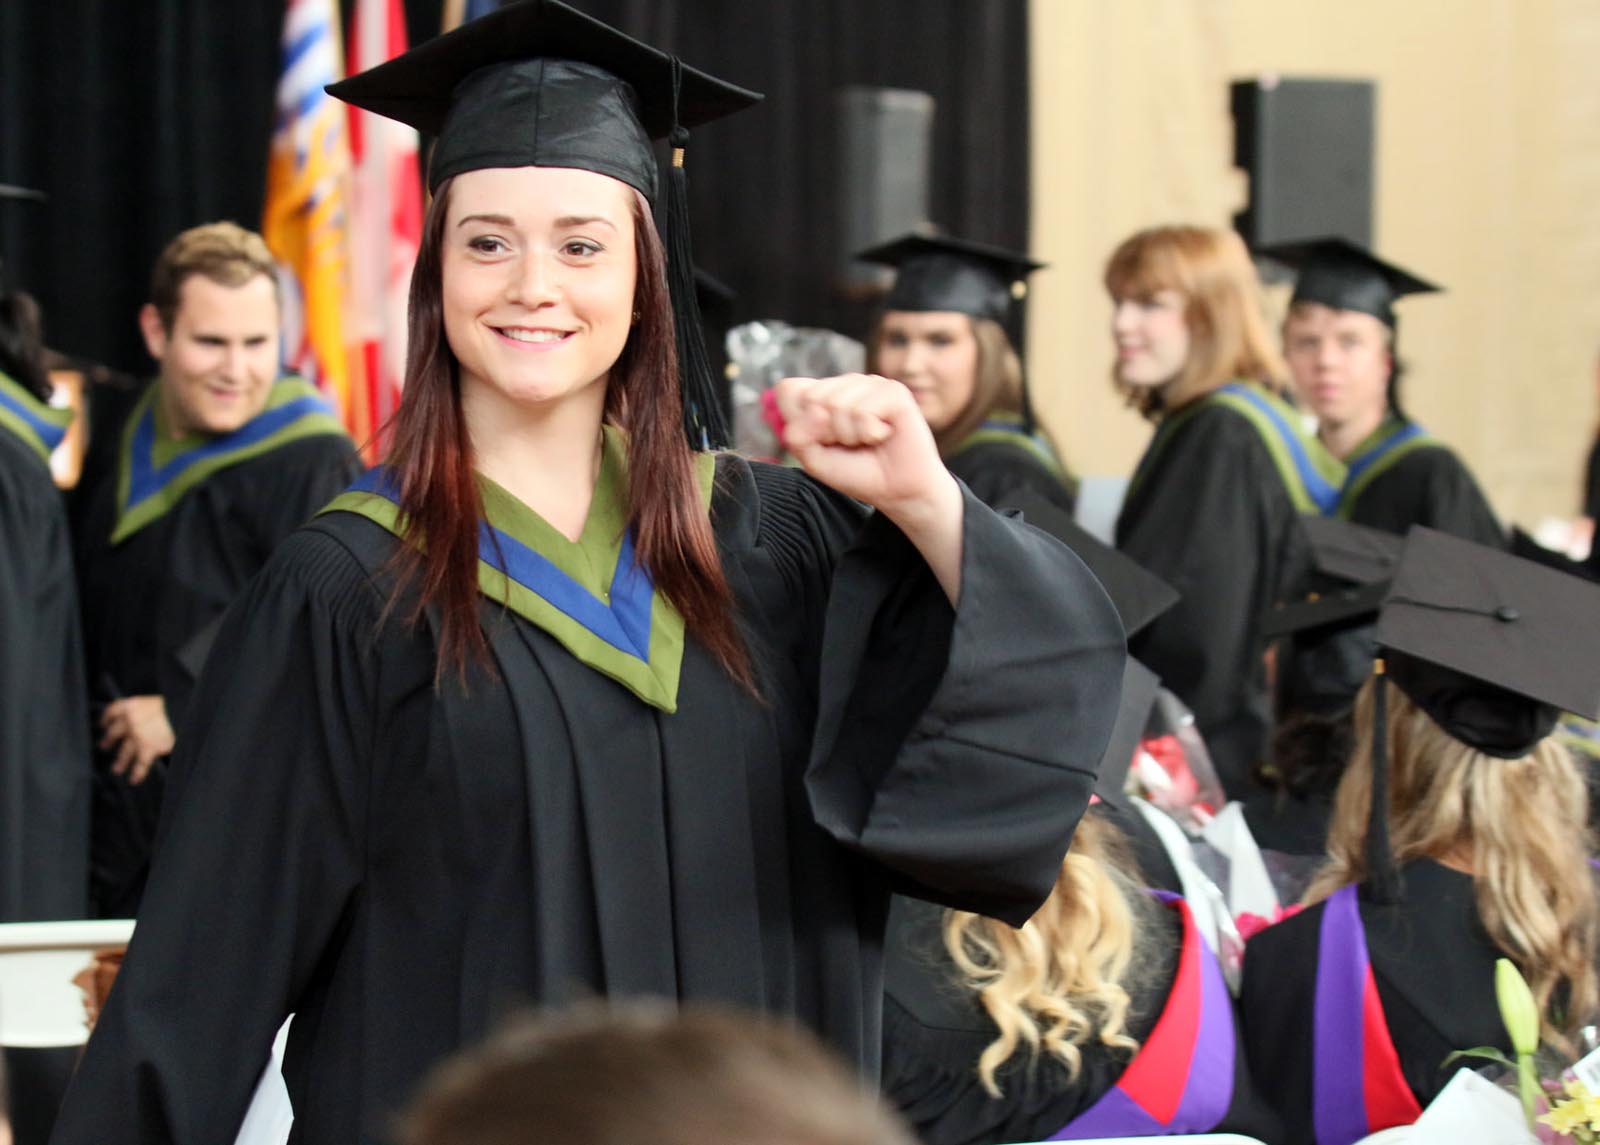 Possible pictures for spring Convocation 2016 by the numbers.